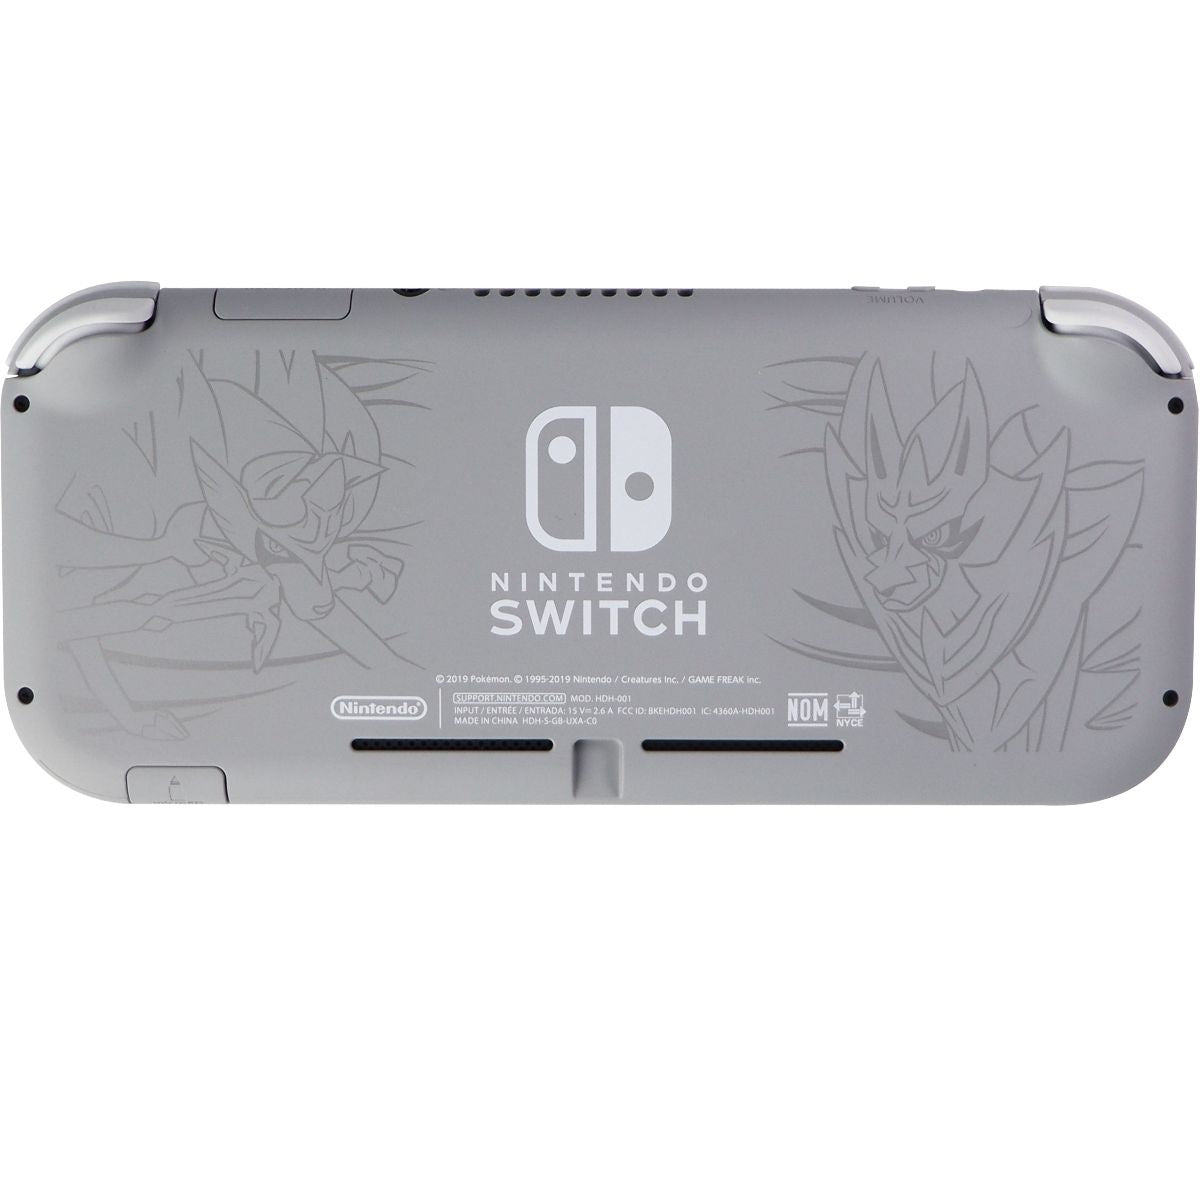 Nintendo Switch Lite - Pokemon Sword and Shield Edition - Light Gray (HDH-001) Gaming/Console - Video Game Consoles Nintendo    - Simple Cell Bulk Wholesale Pricing - USA Seller